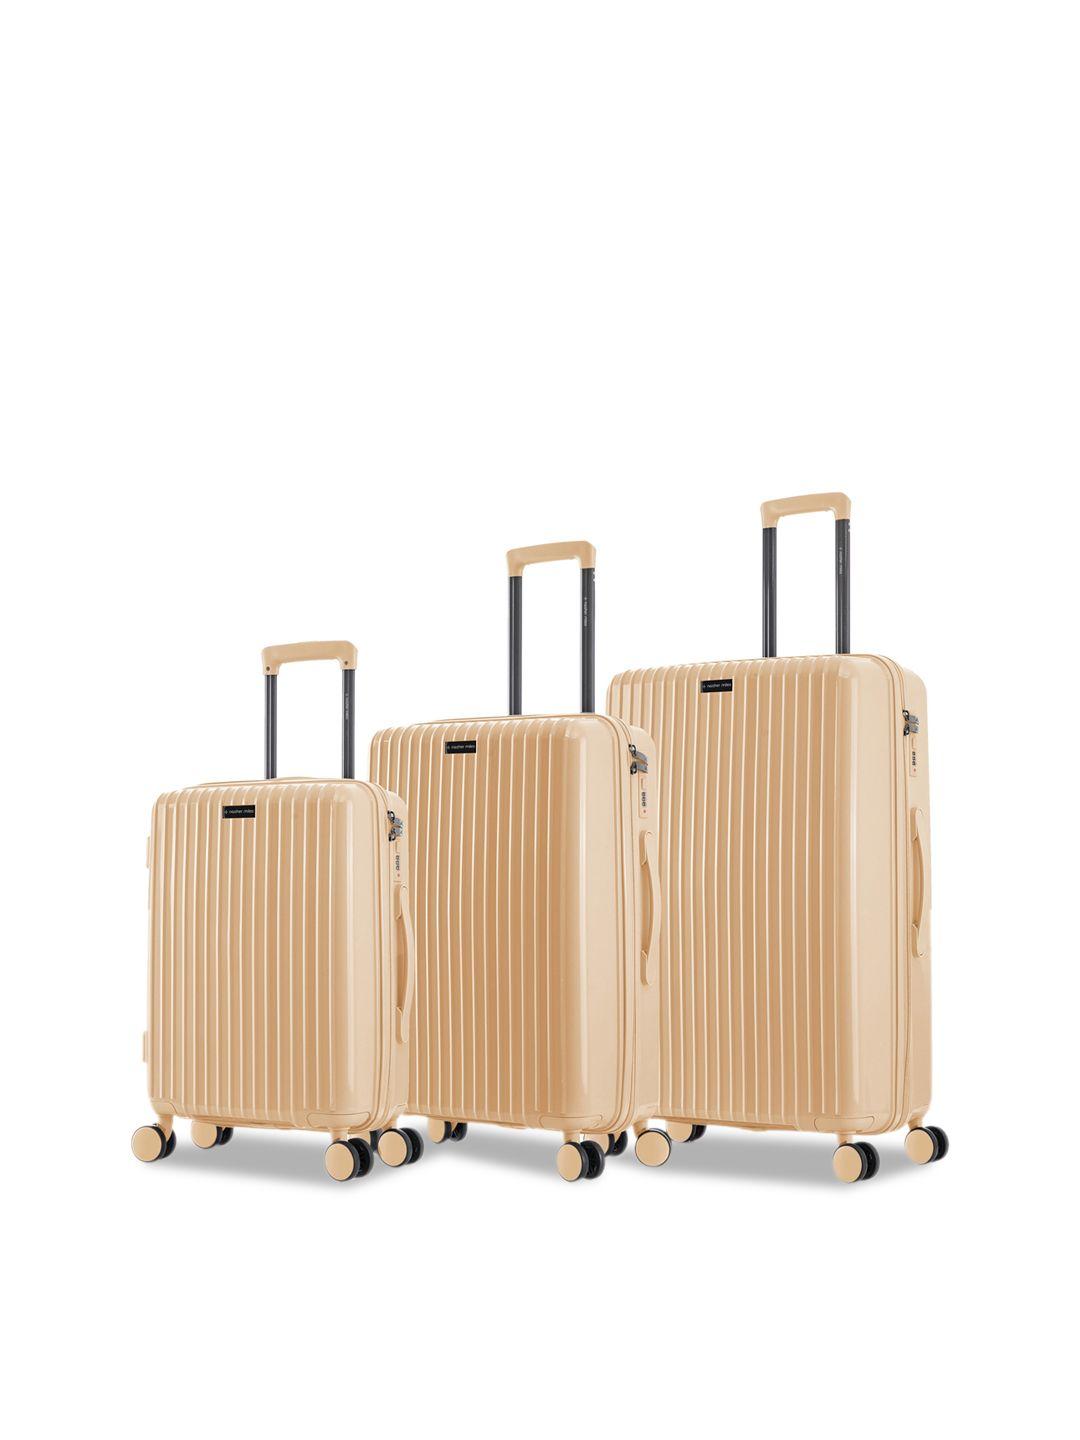 nasher miles auroville set of 3 peach textured hard-sided trolley bags